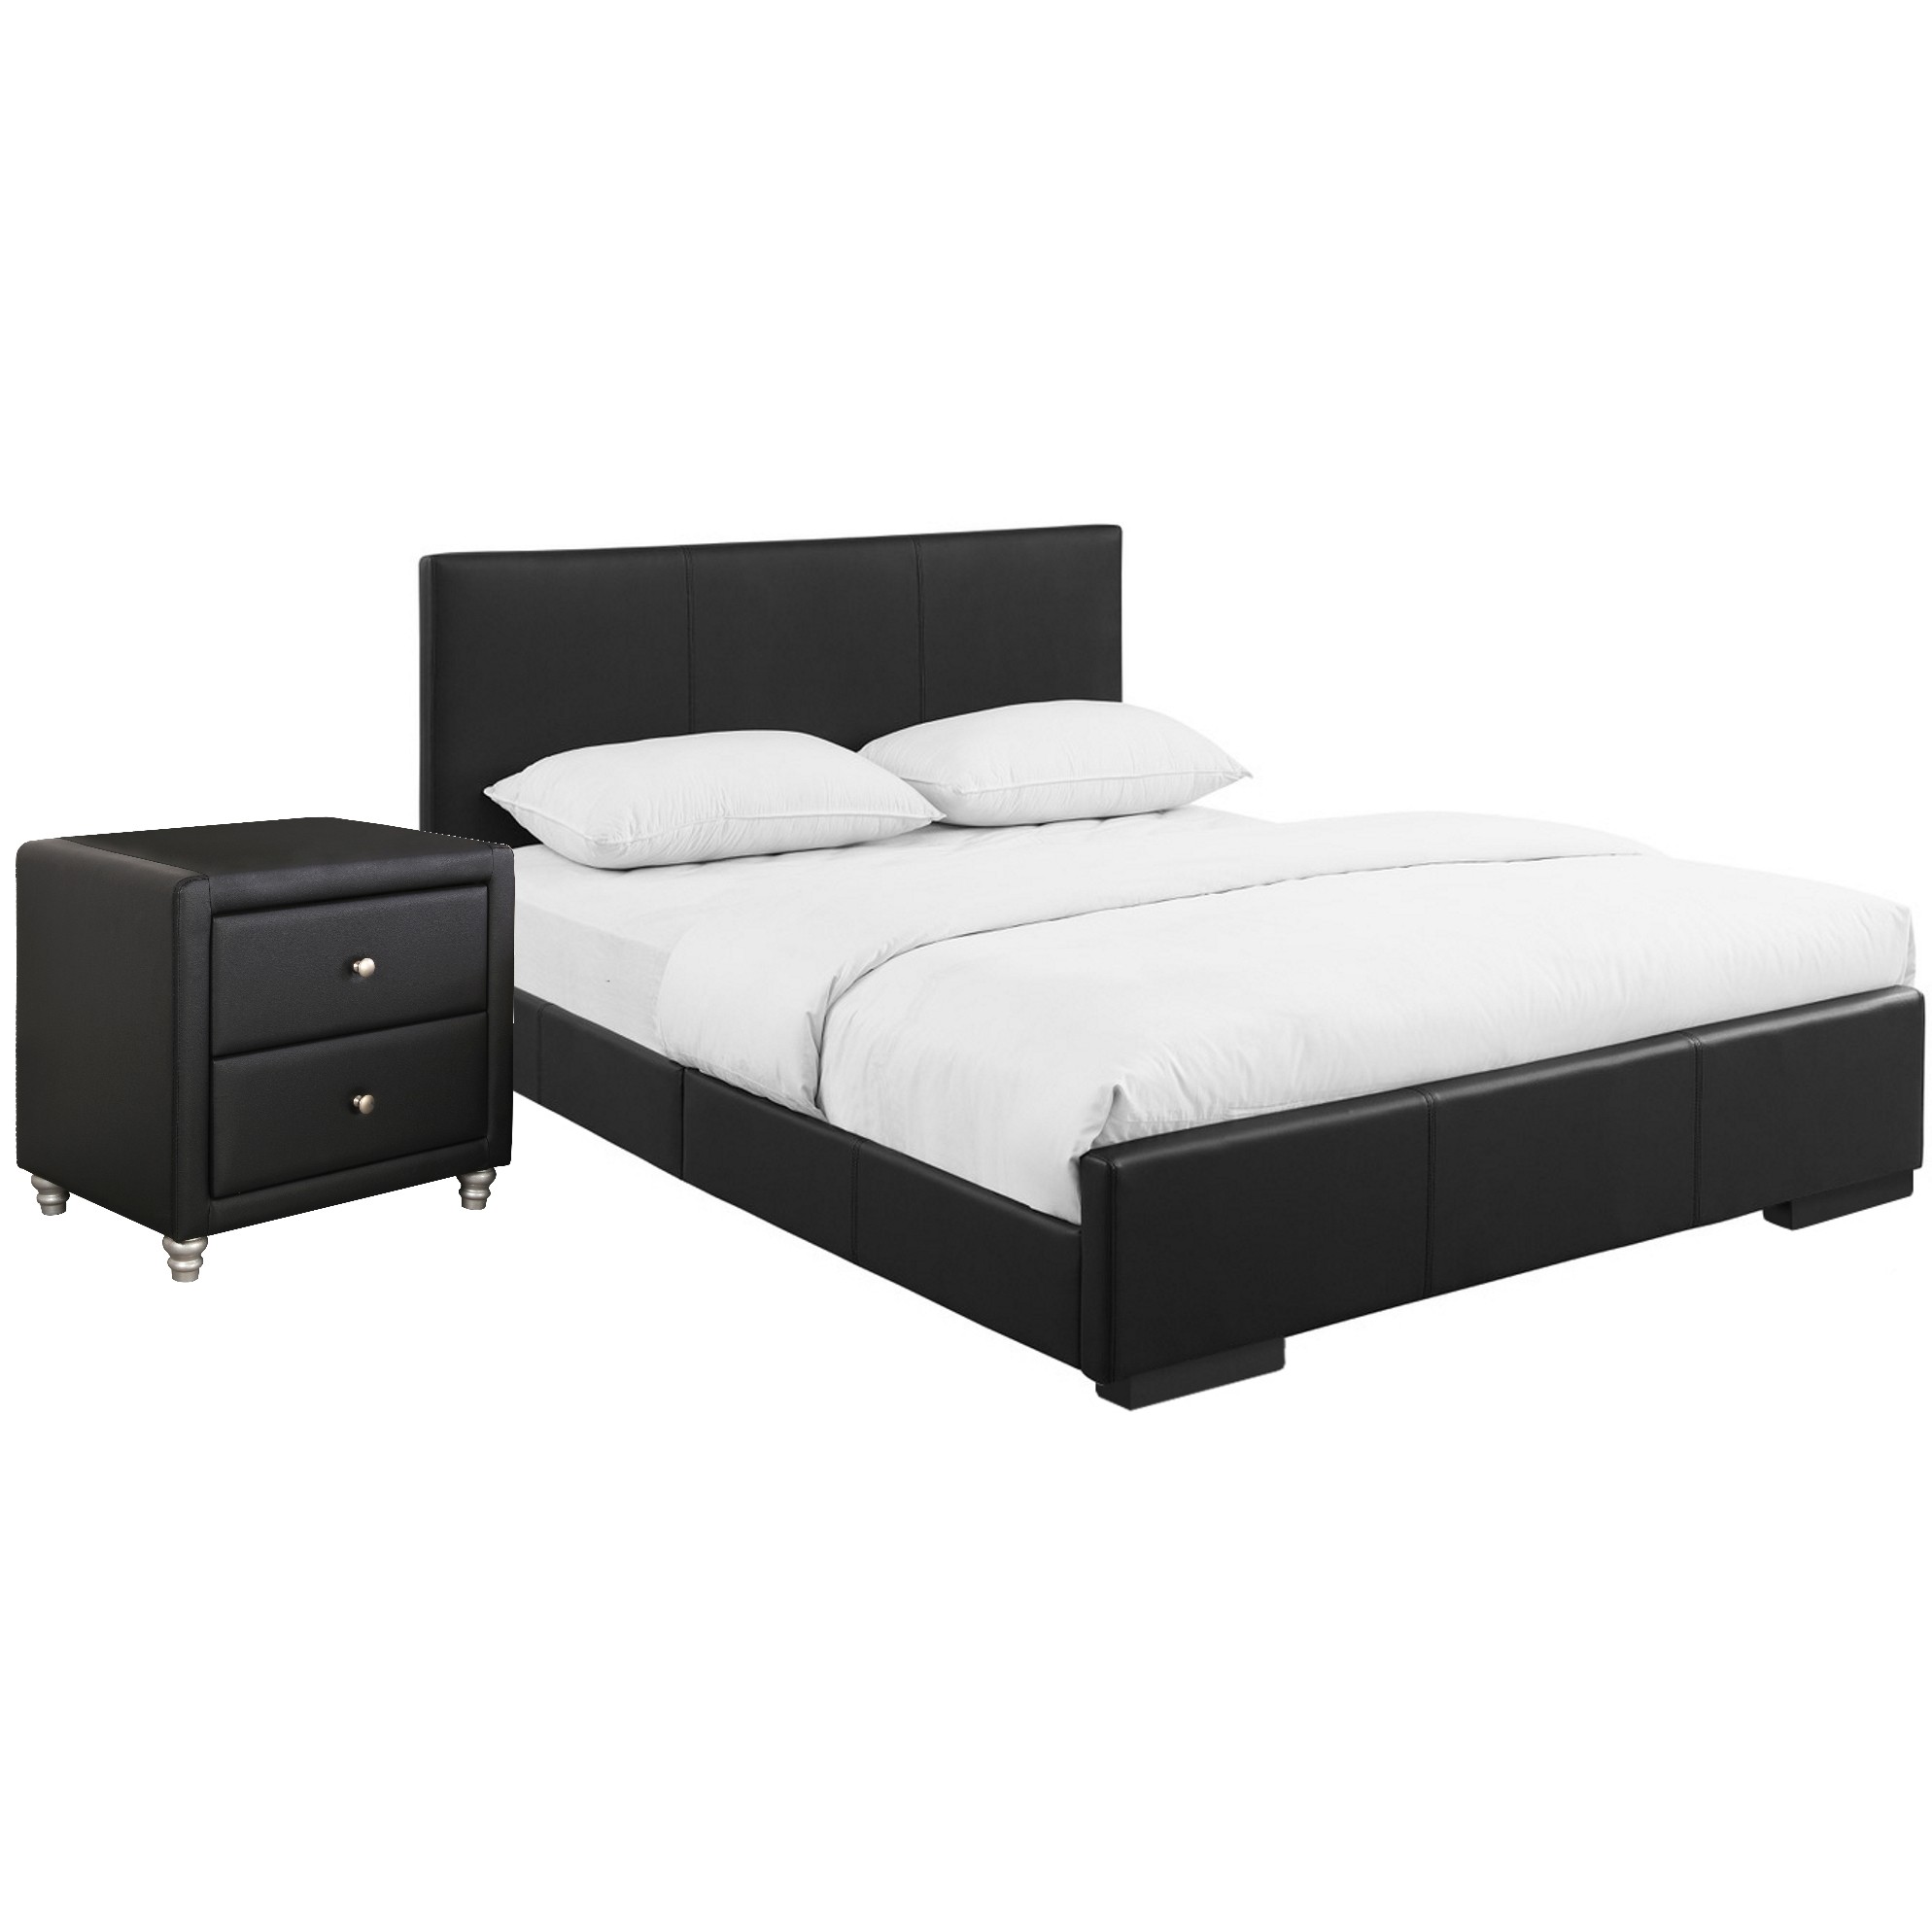 Solid Manufactured Wood Black Standard Bed Upholstered With Headboard-397048-1